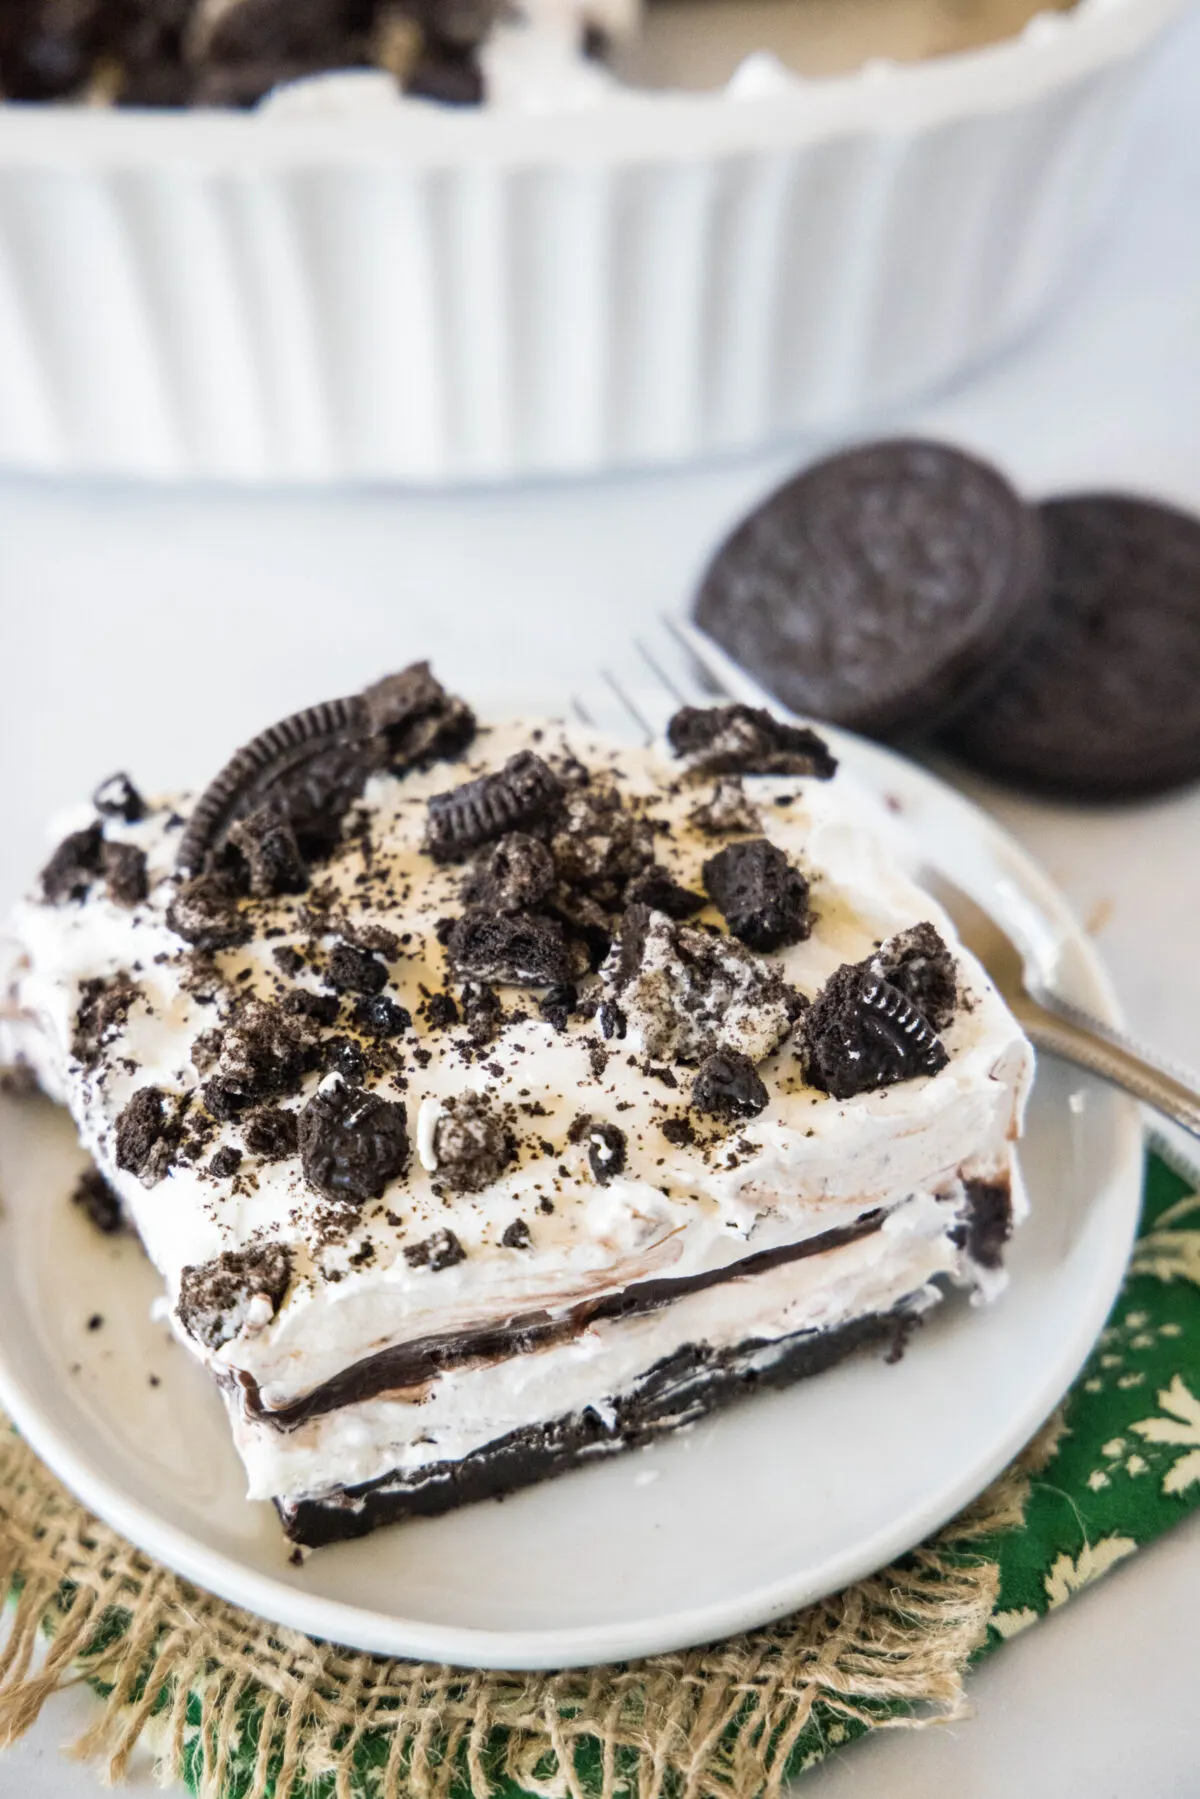 Overhead view of a slice of Oreo squares on a plate, topped with crumbled Oreos, next to a few Oreos